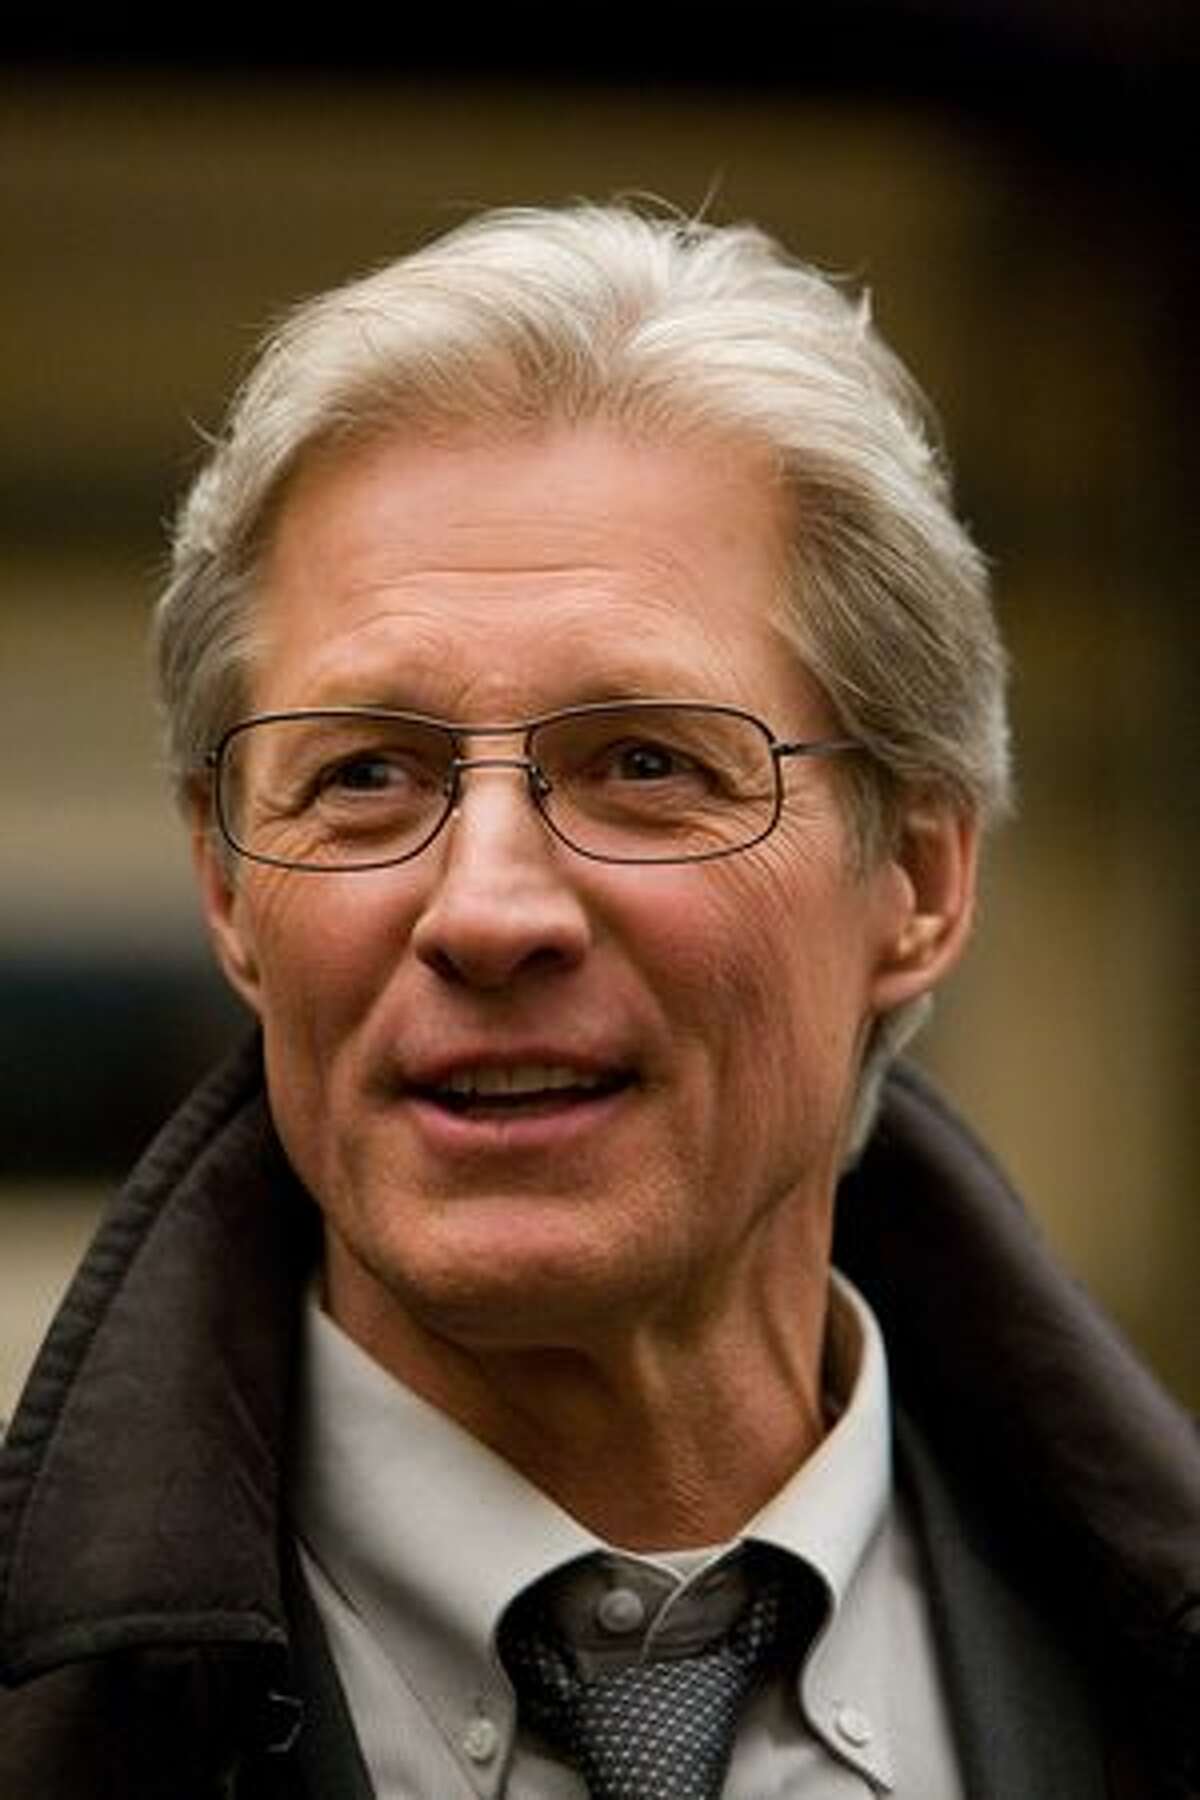 Bruce Boxleitner as Alan Bradley, a business partner of Flynn's who became Sam's guardian when Flynn disappeared in the '80s.